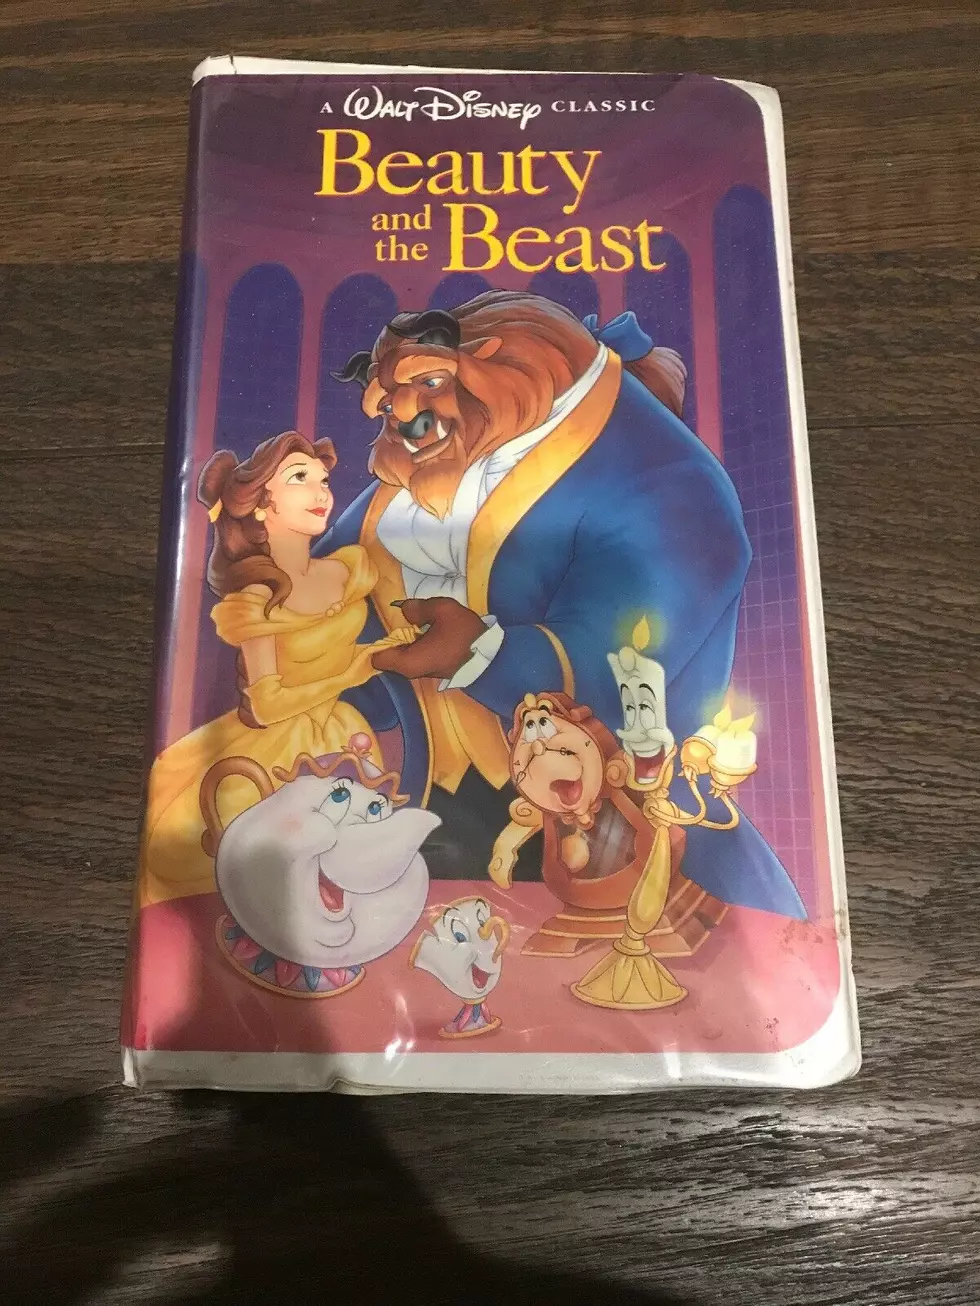 Look How Much People Are Trying to Sell Disney VHS Tapes For